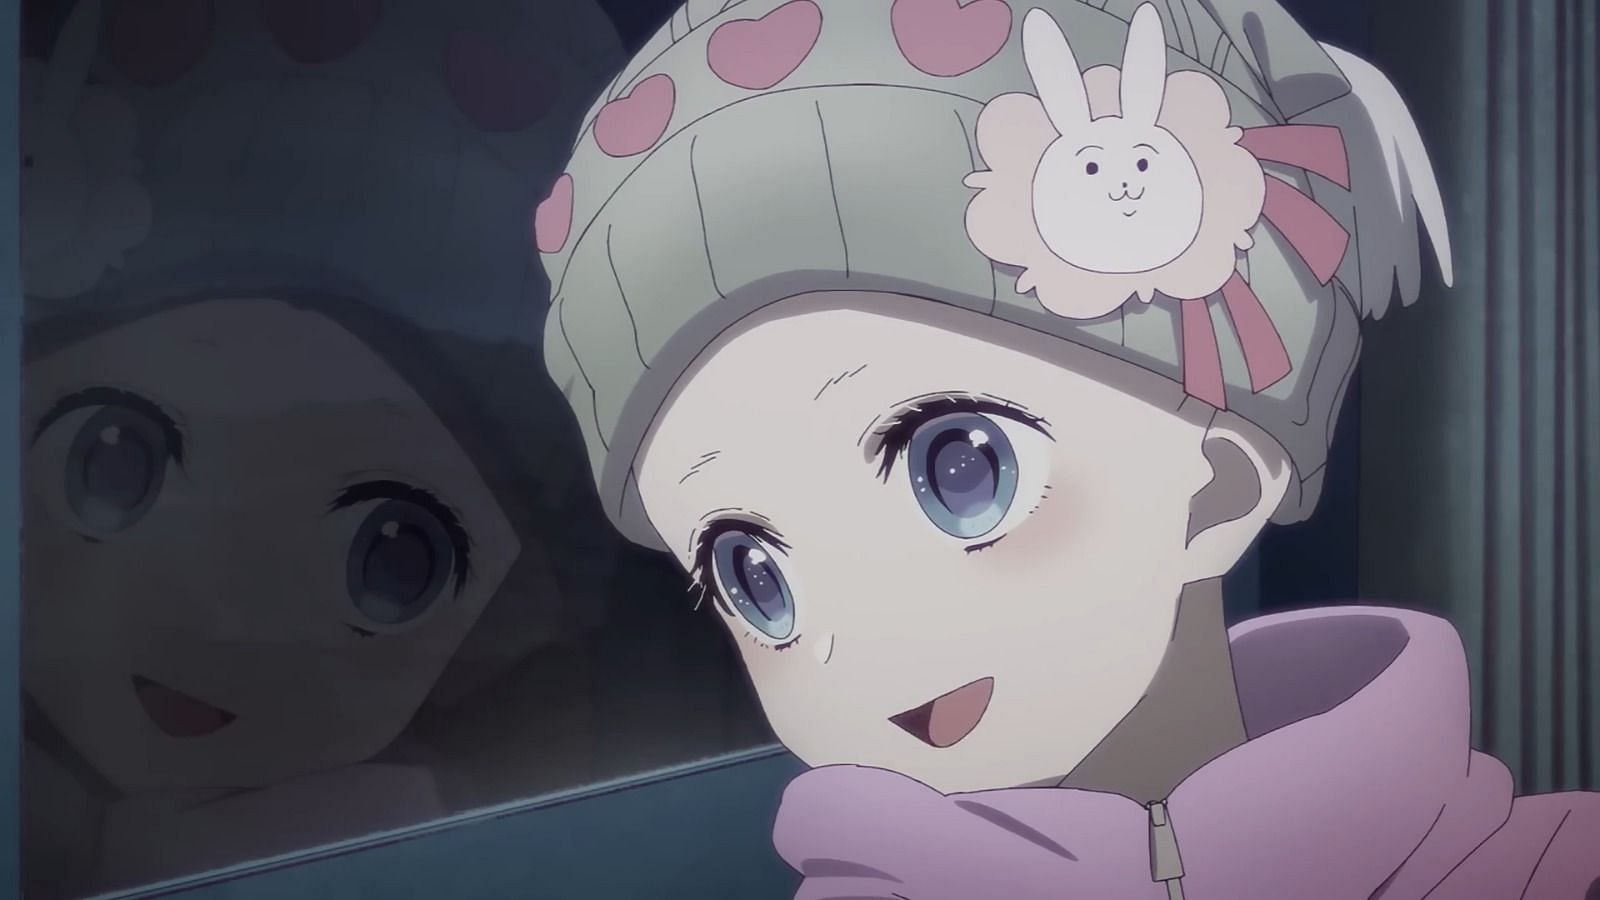 Oshi no Ko episode 1 takes the world by storm with an impactful